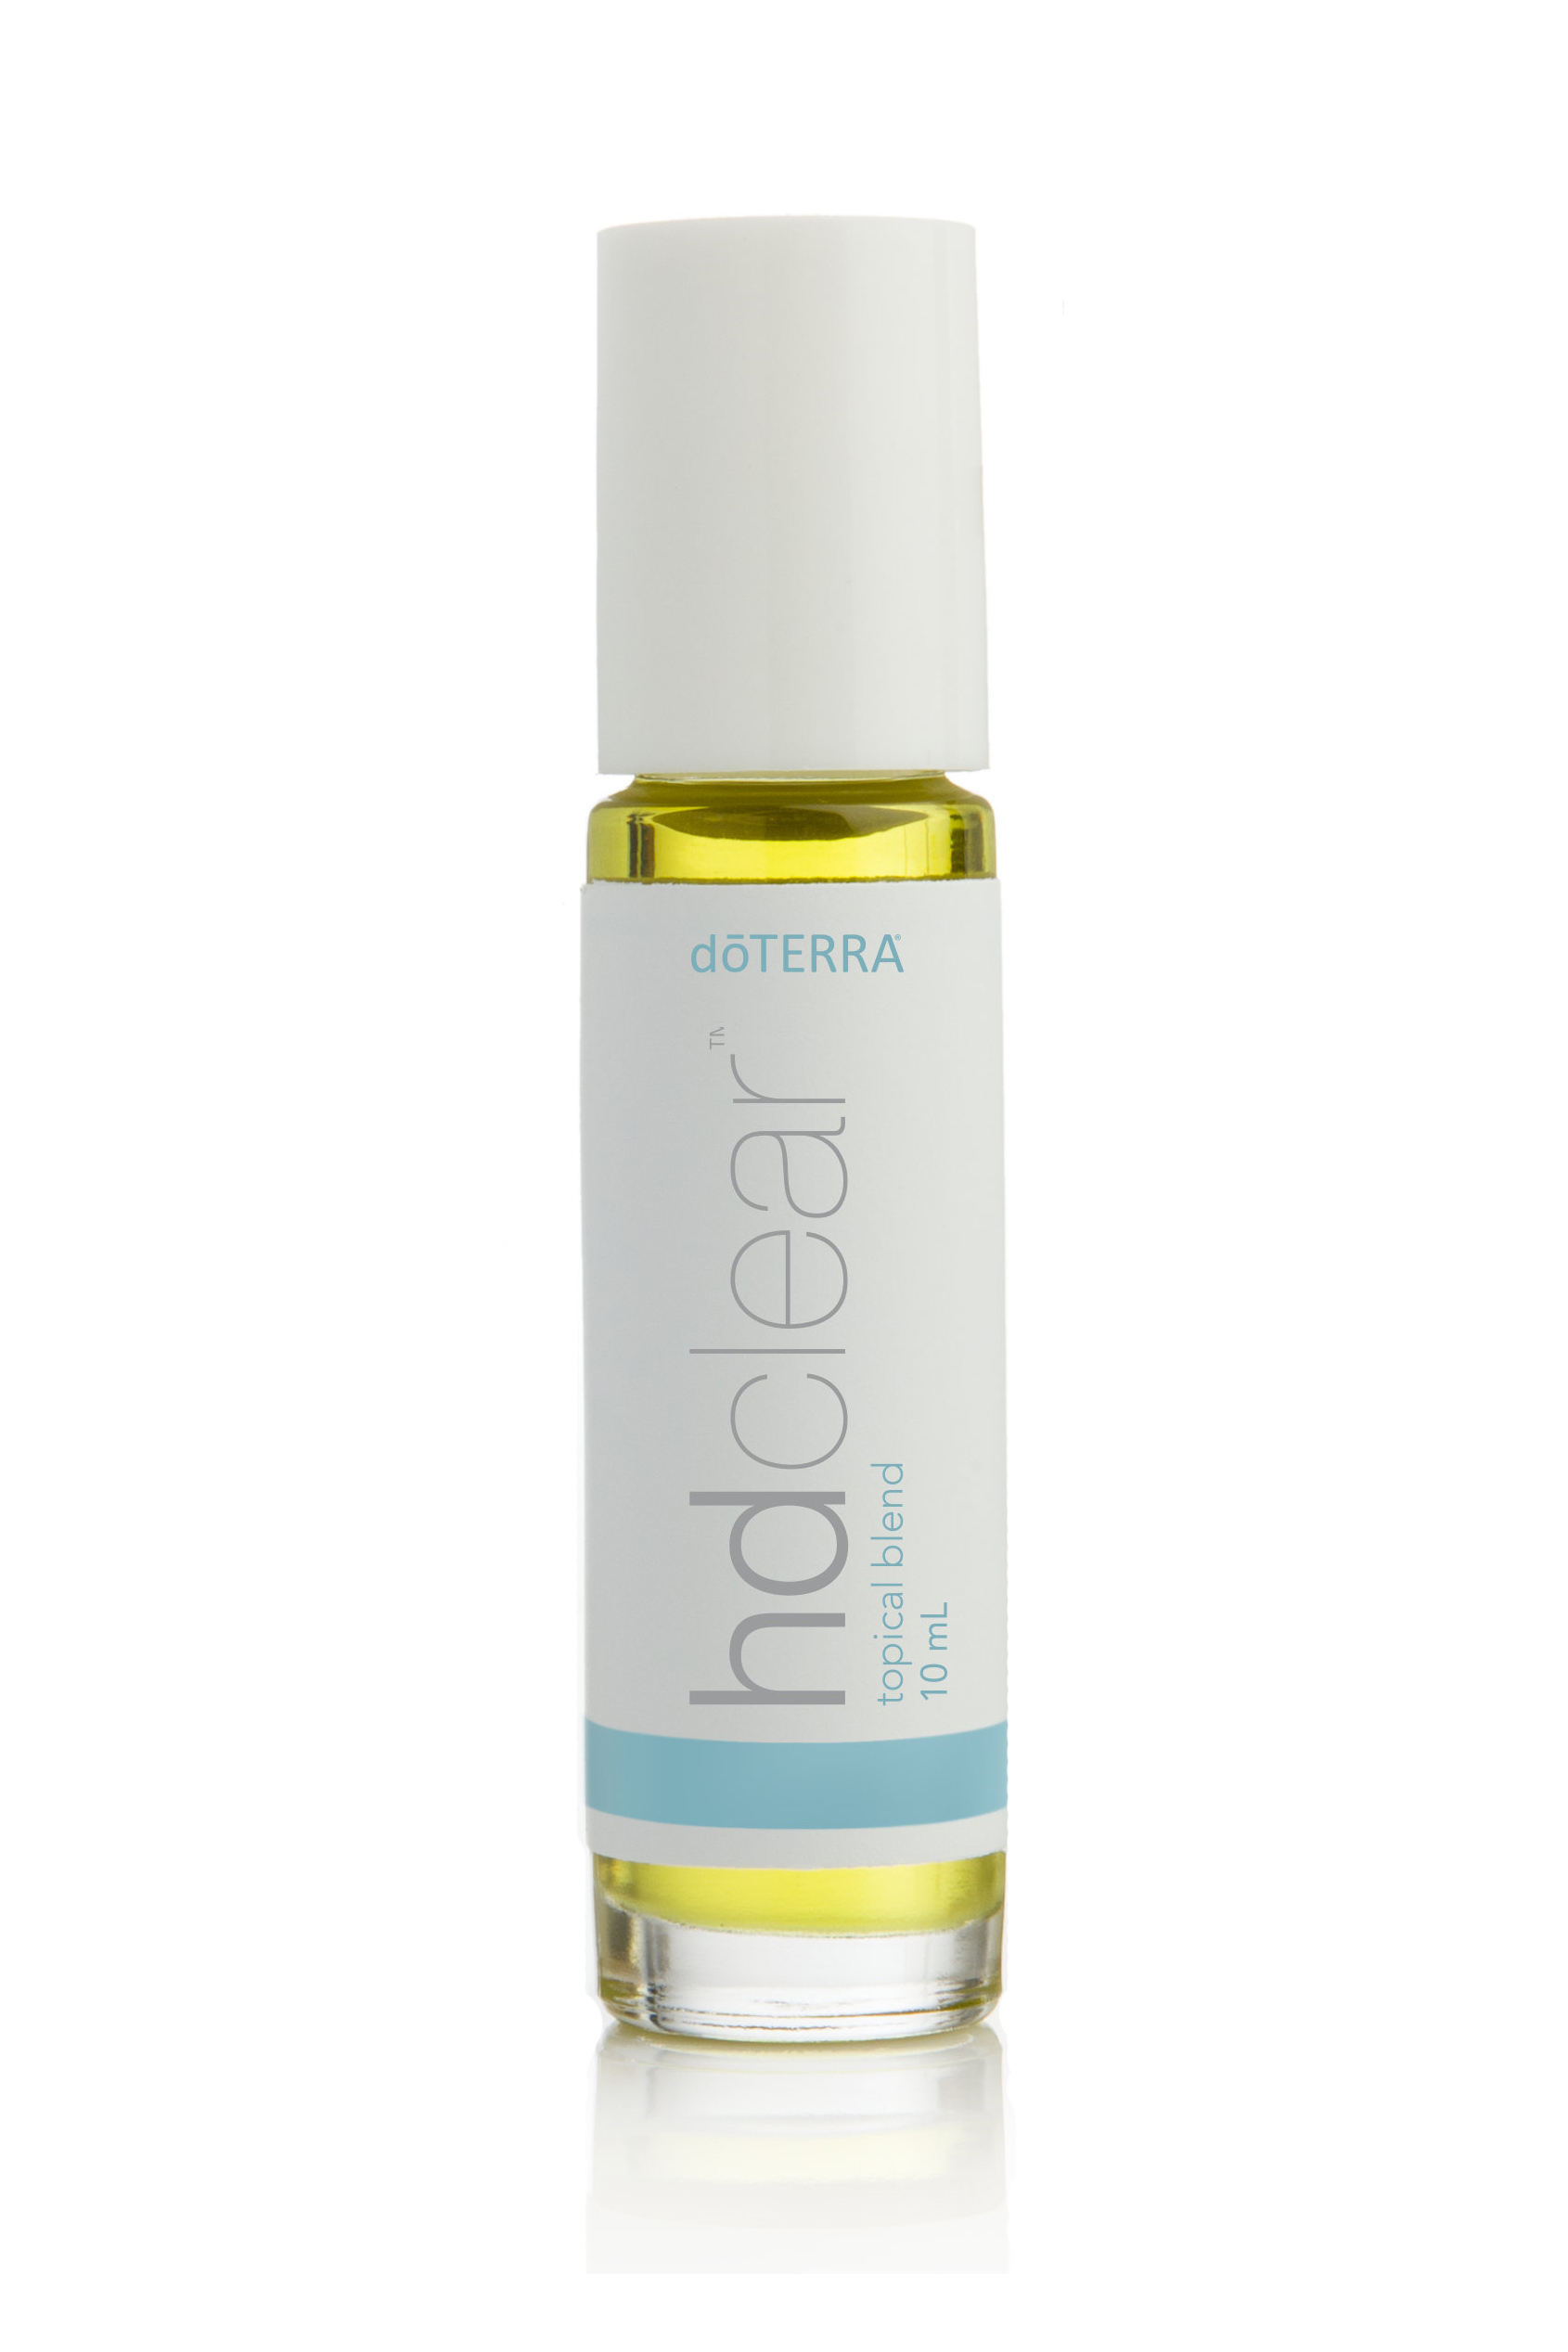 HD Clear™ Topical Essential Oils Blend